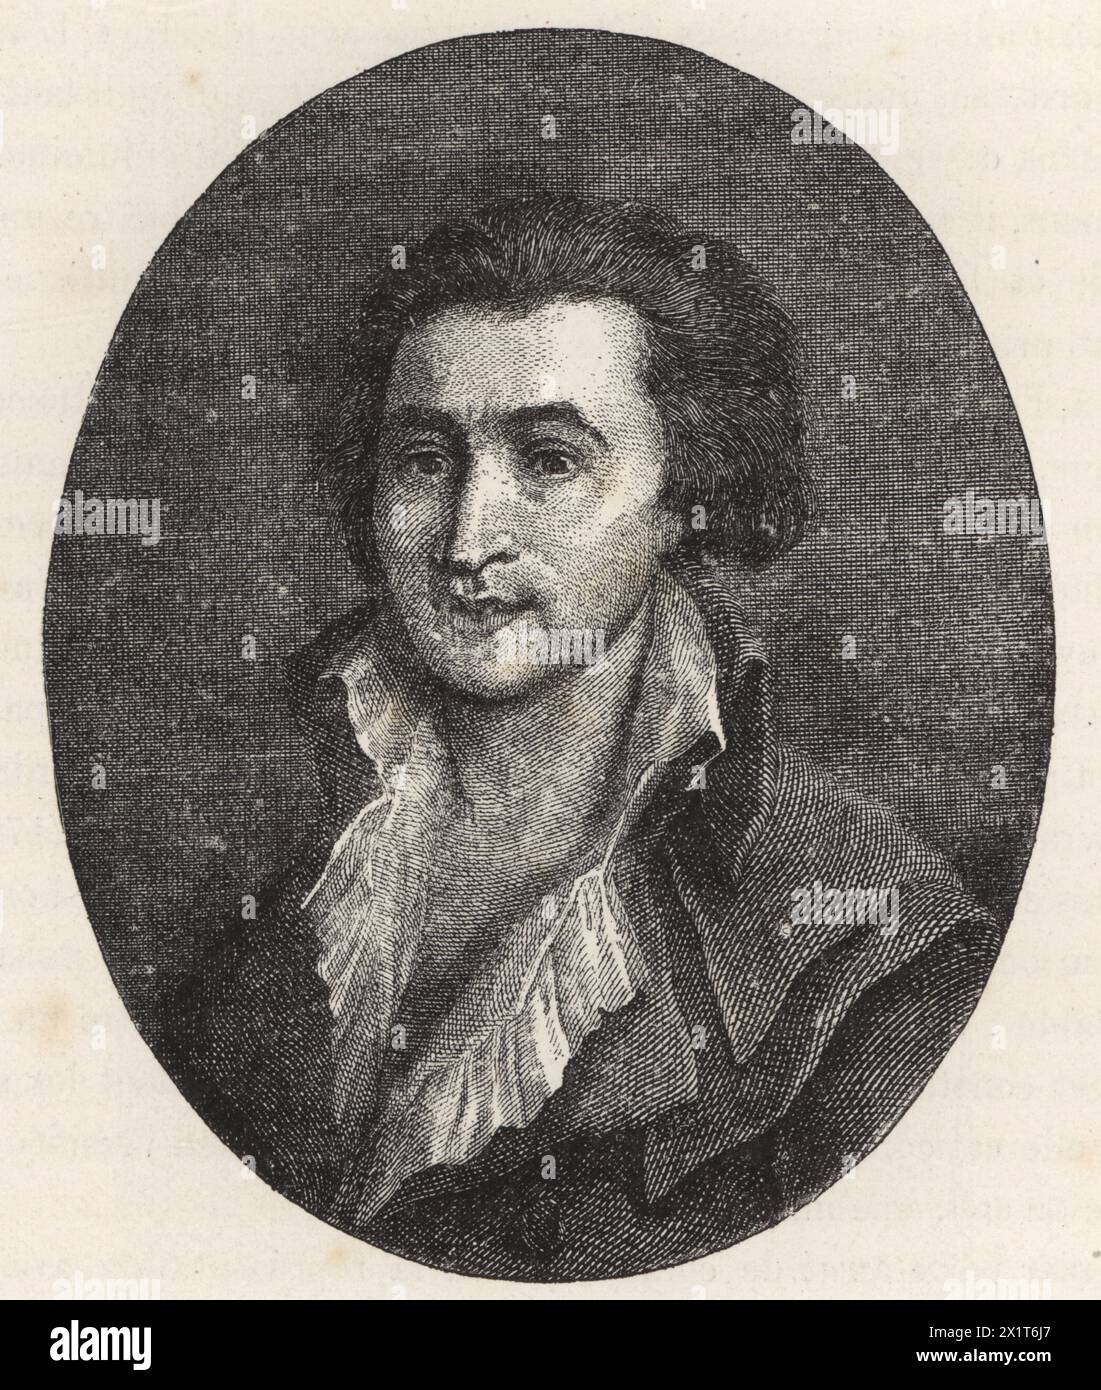 Fabre d'Églantine, French actor, dramatist and politician of the French Revolution, 1750-1794. Named the months of the French Revolutionary calendar. Engraved by Louis-François Mariage after a painting by François Bonneville. Illustration from Paul Lacroix's Directoire, Consulat et Empire, (Directory, Consulate and Empire), Paris, 1884. Stock Photo